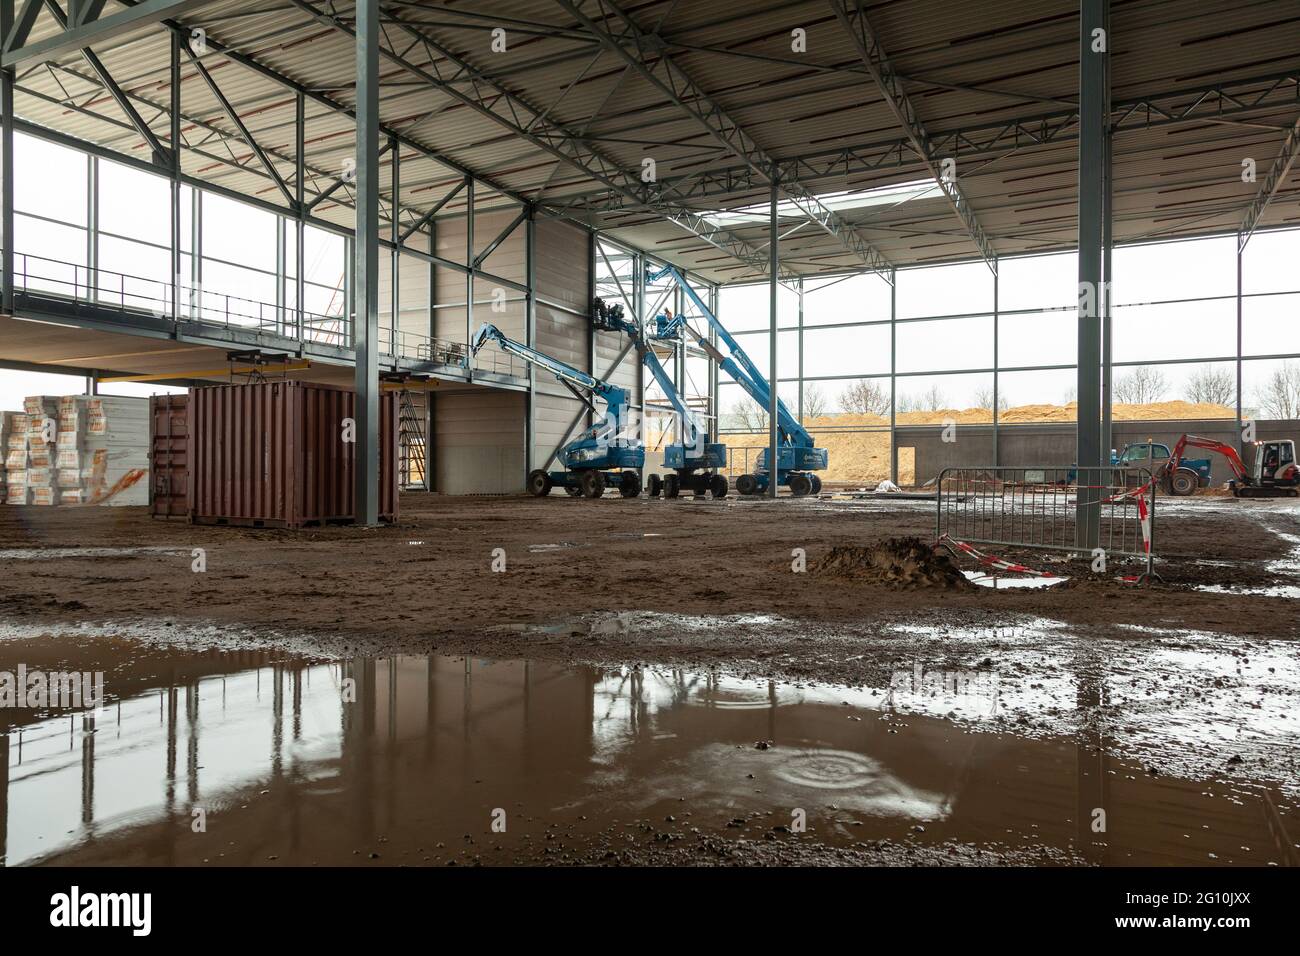 VENLO, NETHERLANDS - Feb 01, 2018: Multiple aerial platforms in a warehouse that is under construction. Stock Photo